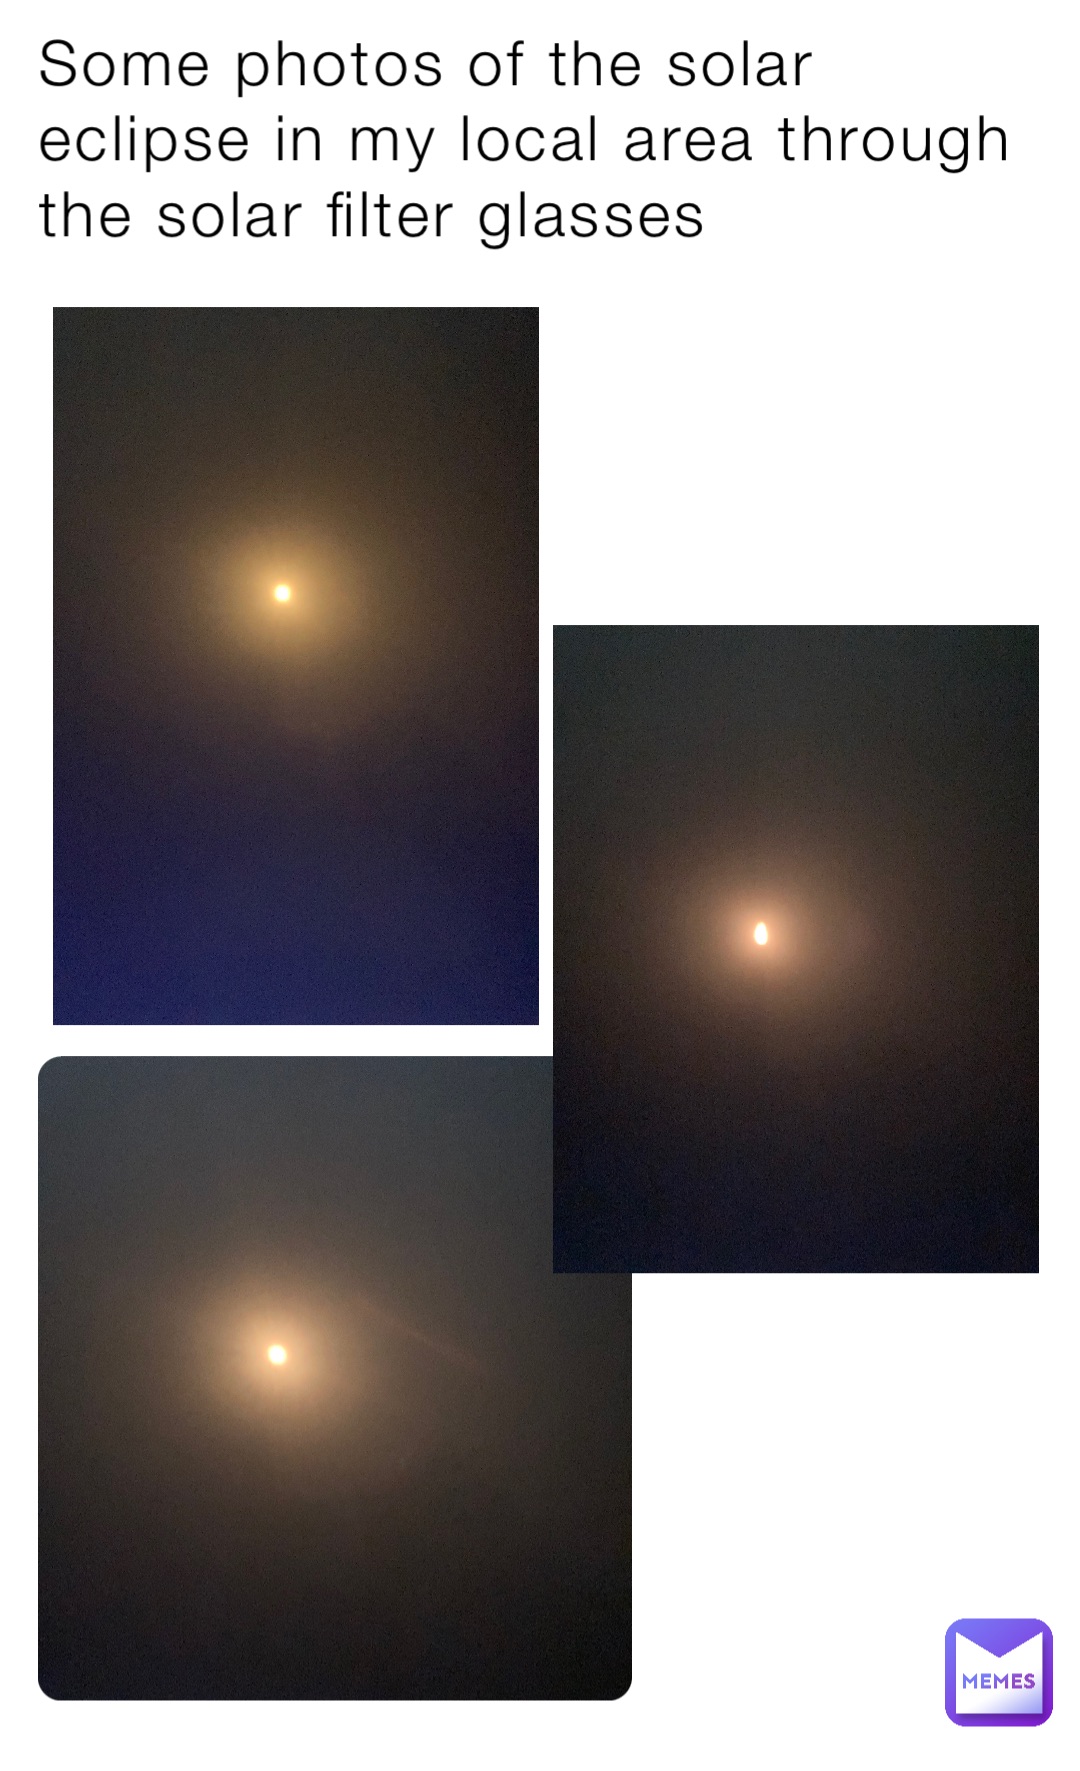 Some photos of the solar eclipse in my local area through the solar filter glasses